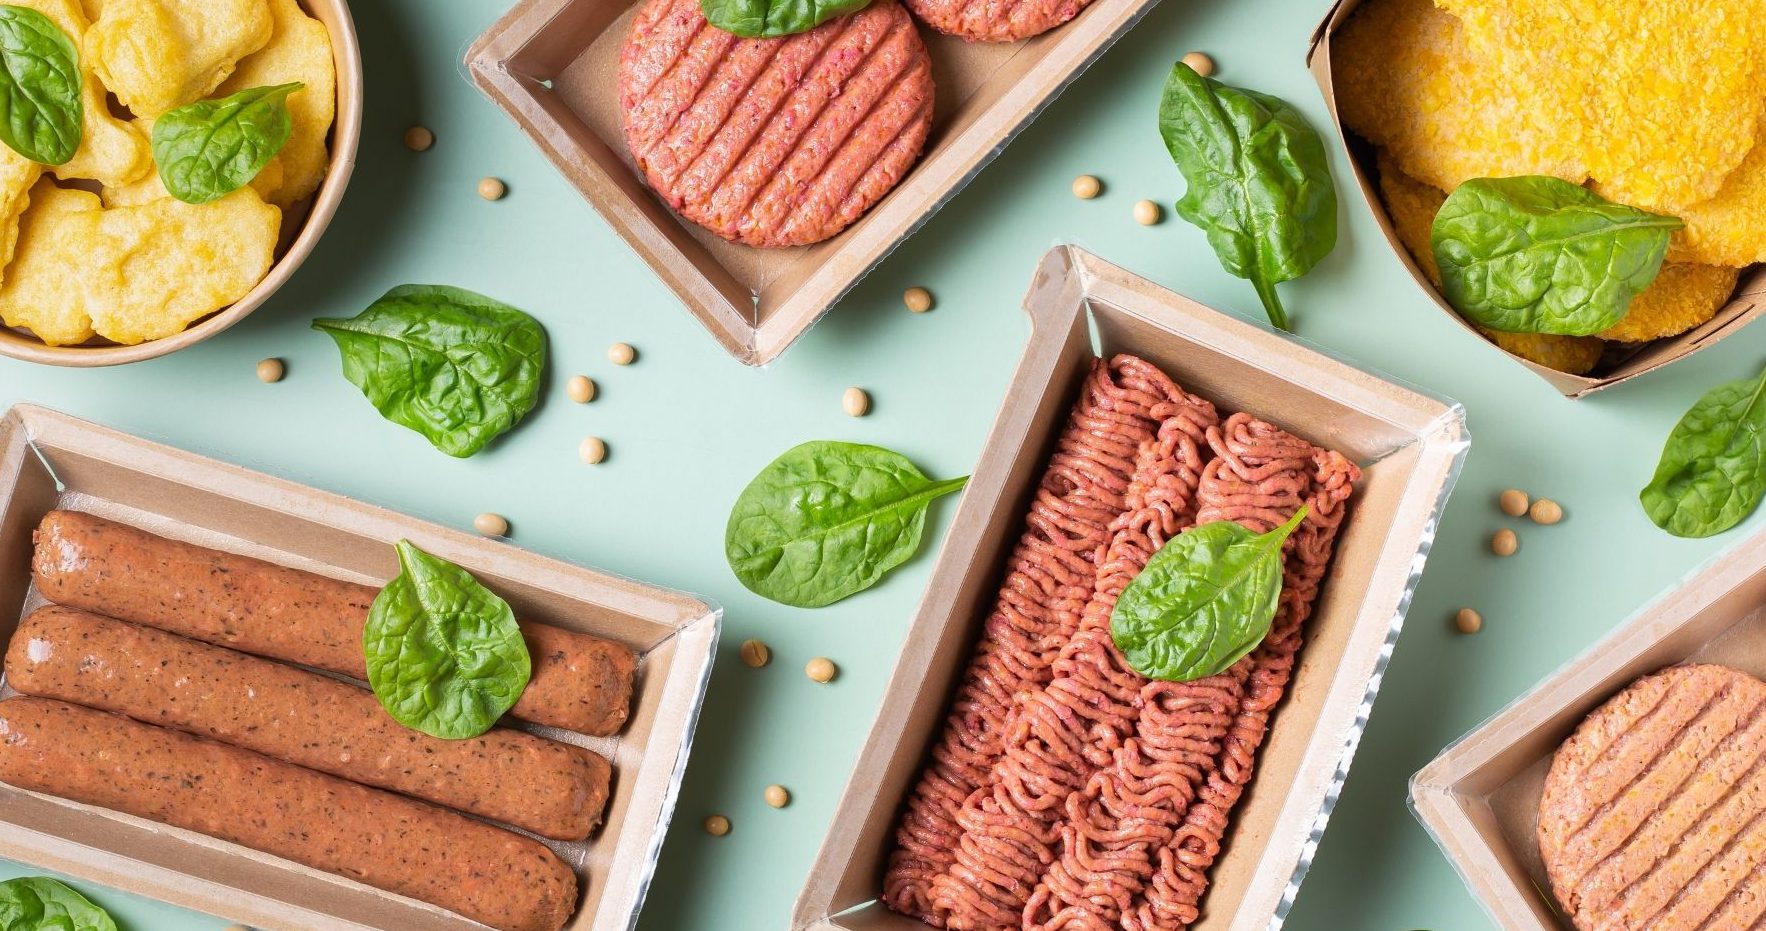 Global Plant-Based Meat Market Outlook, Opportunities And Strategies